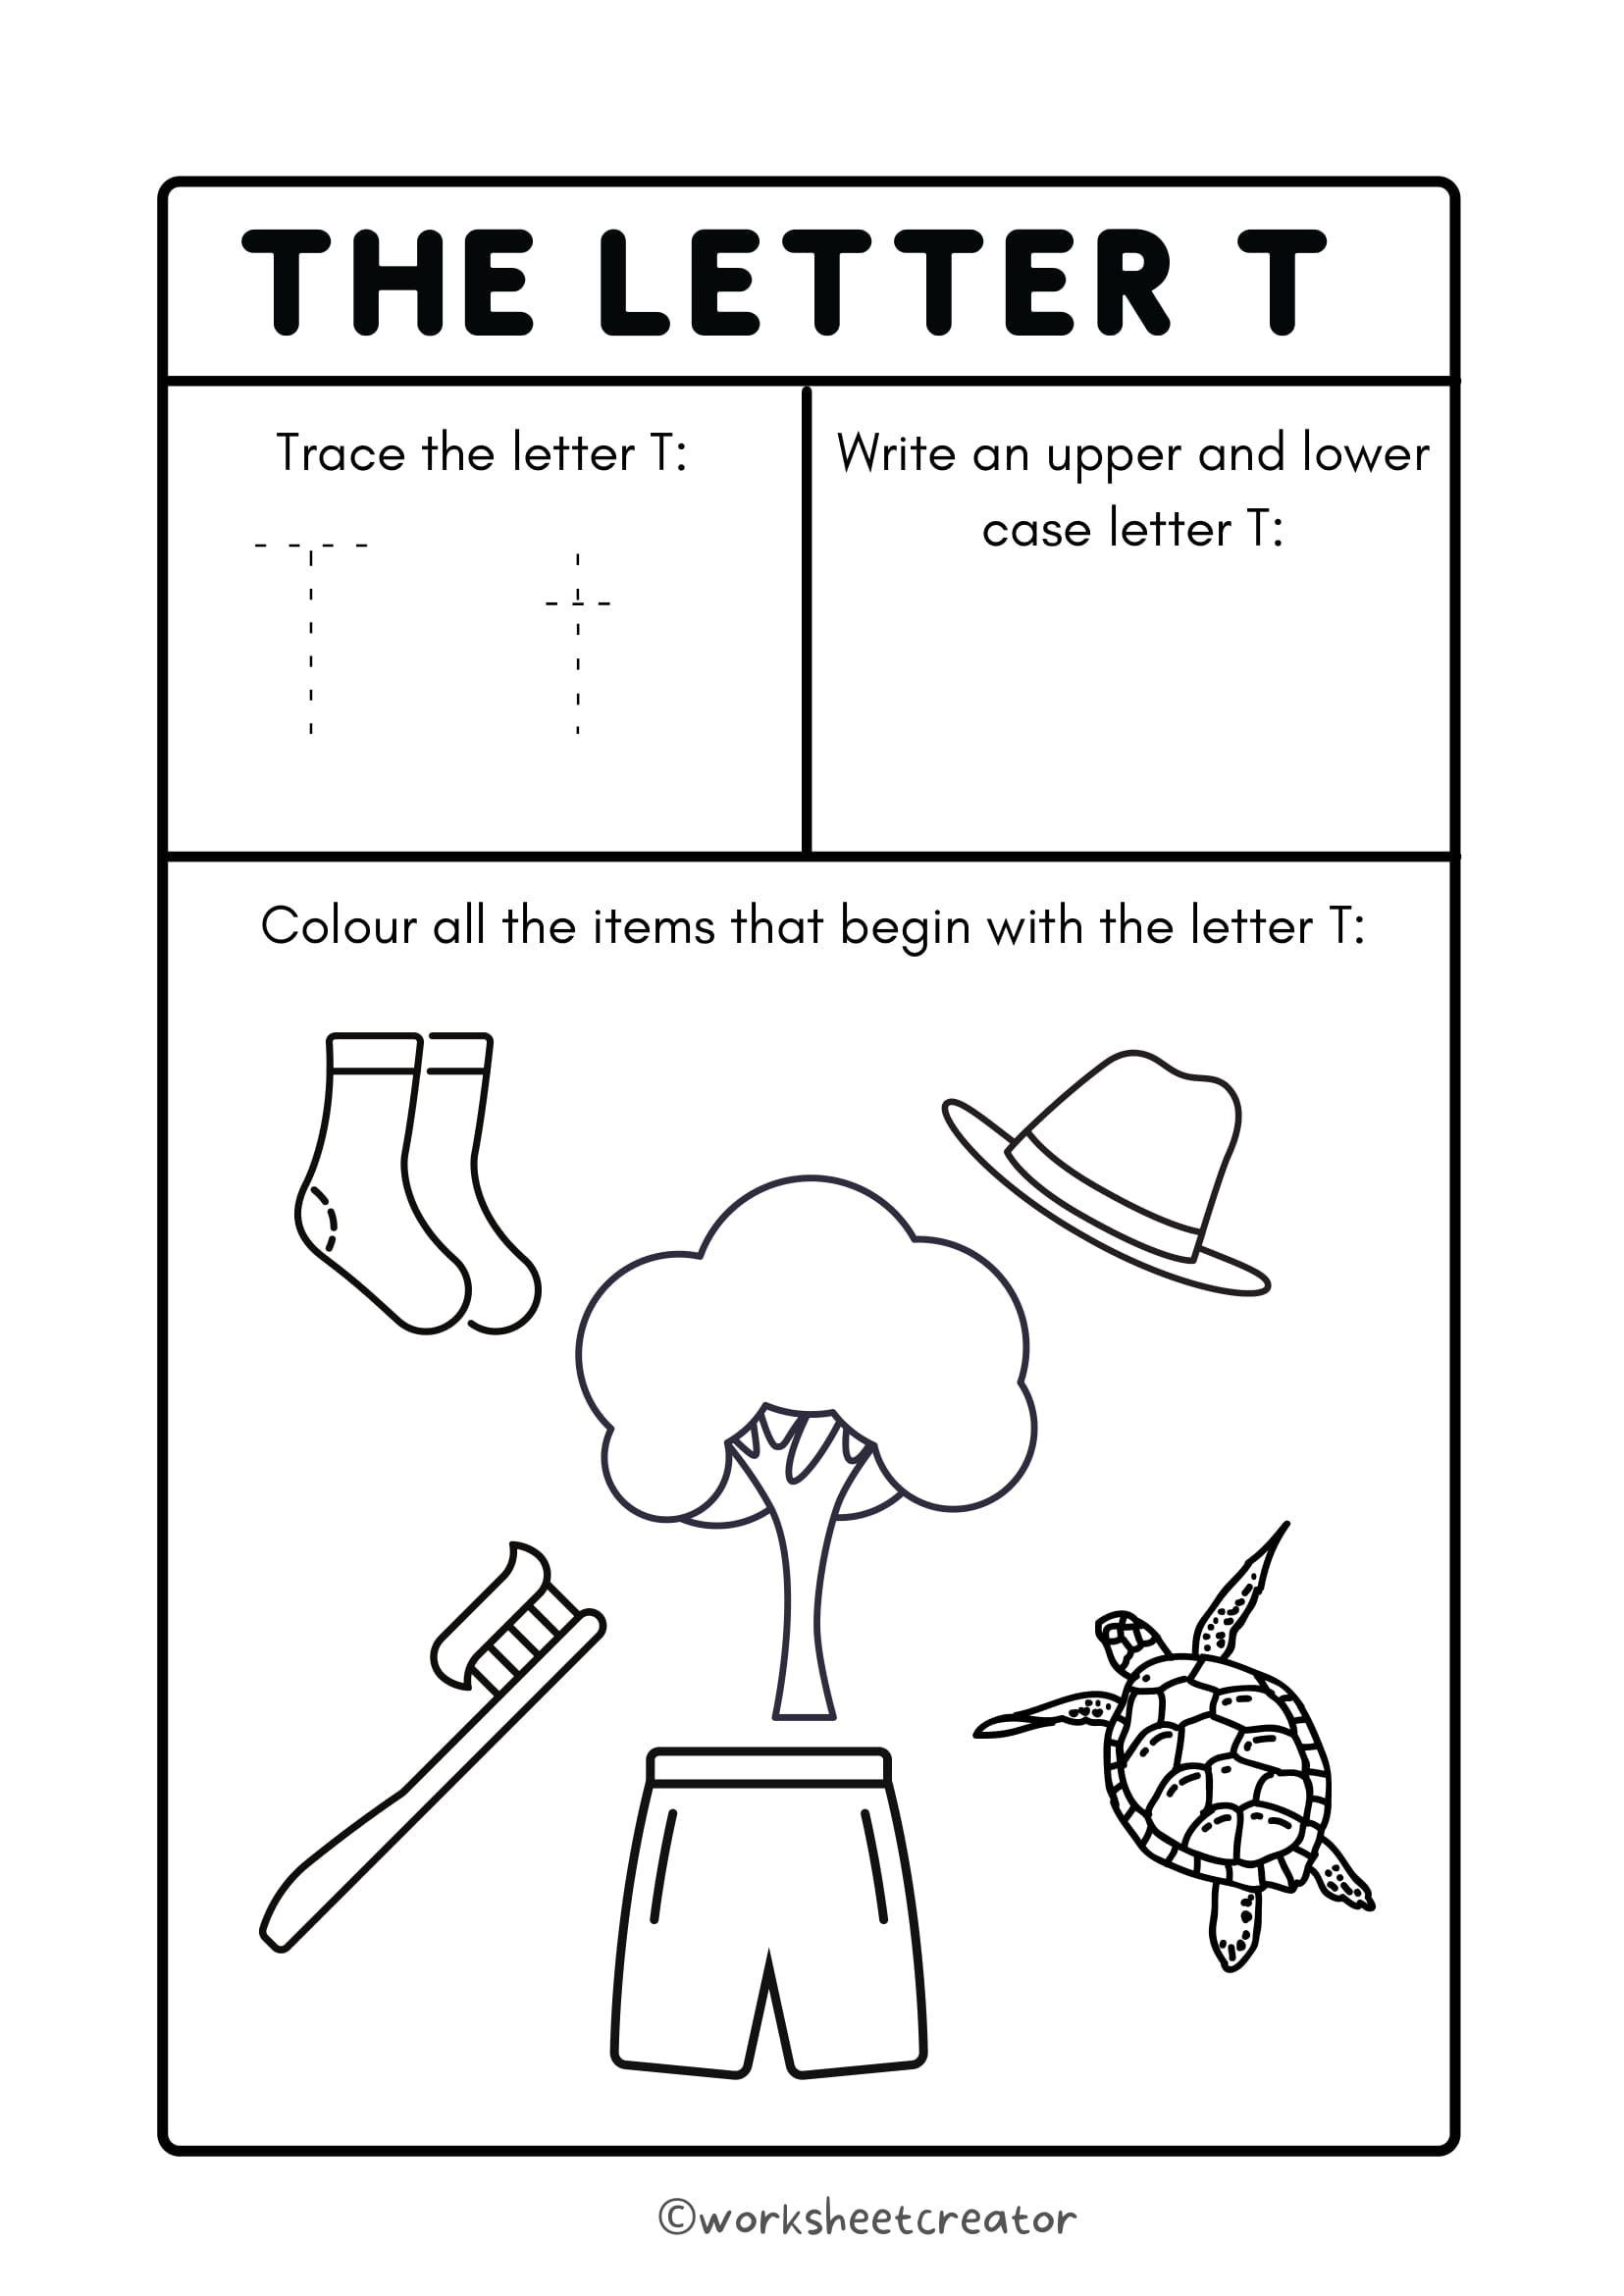 A to Z letter tracing worksheets pdf free download